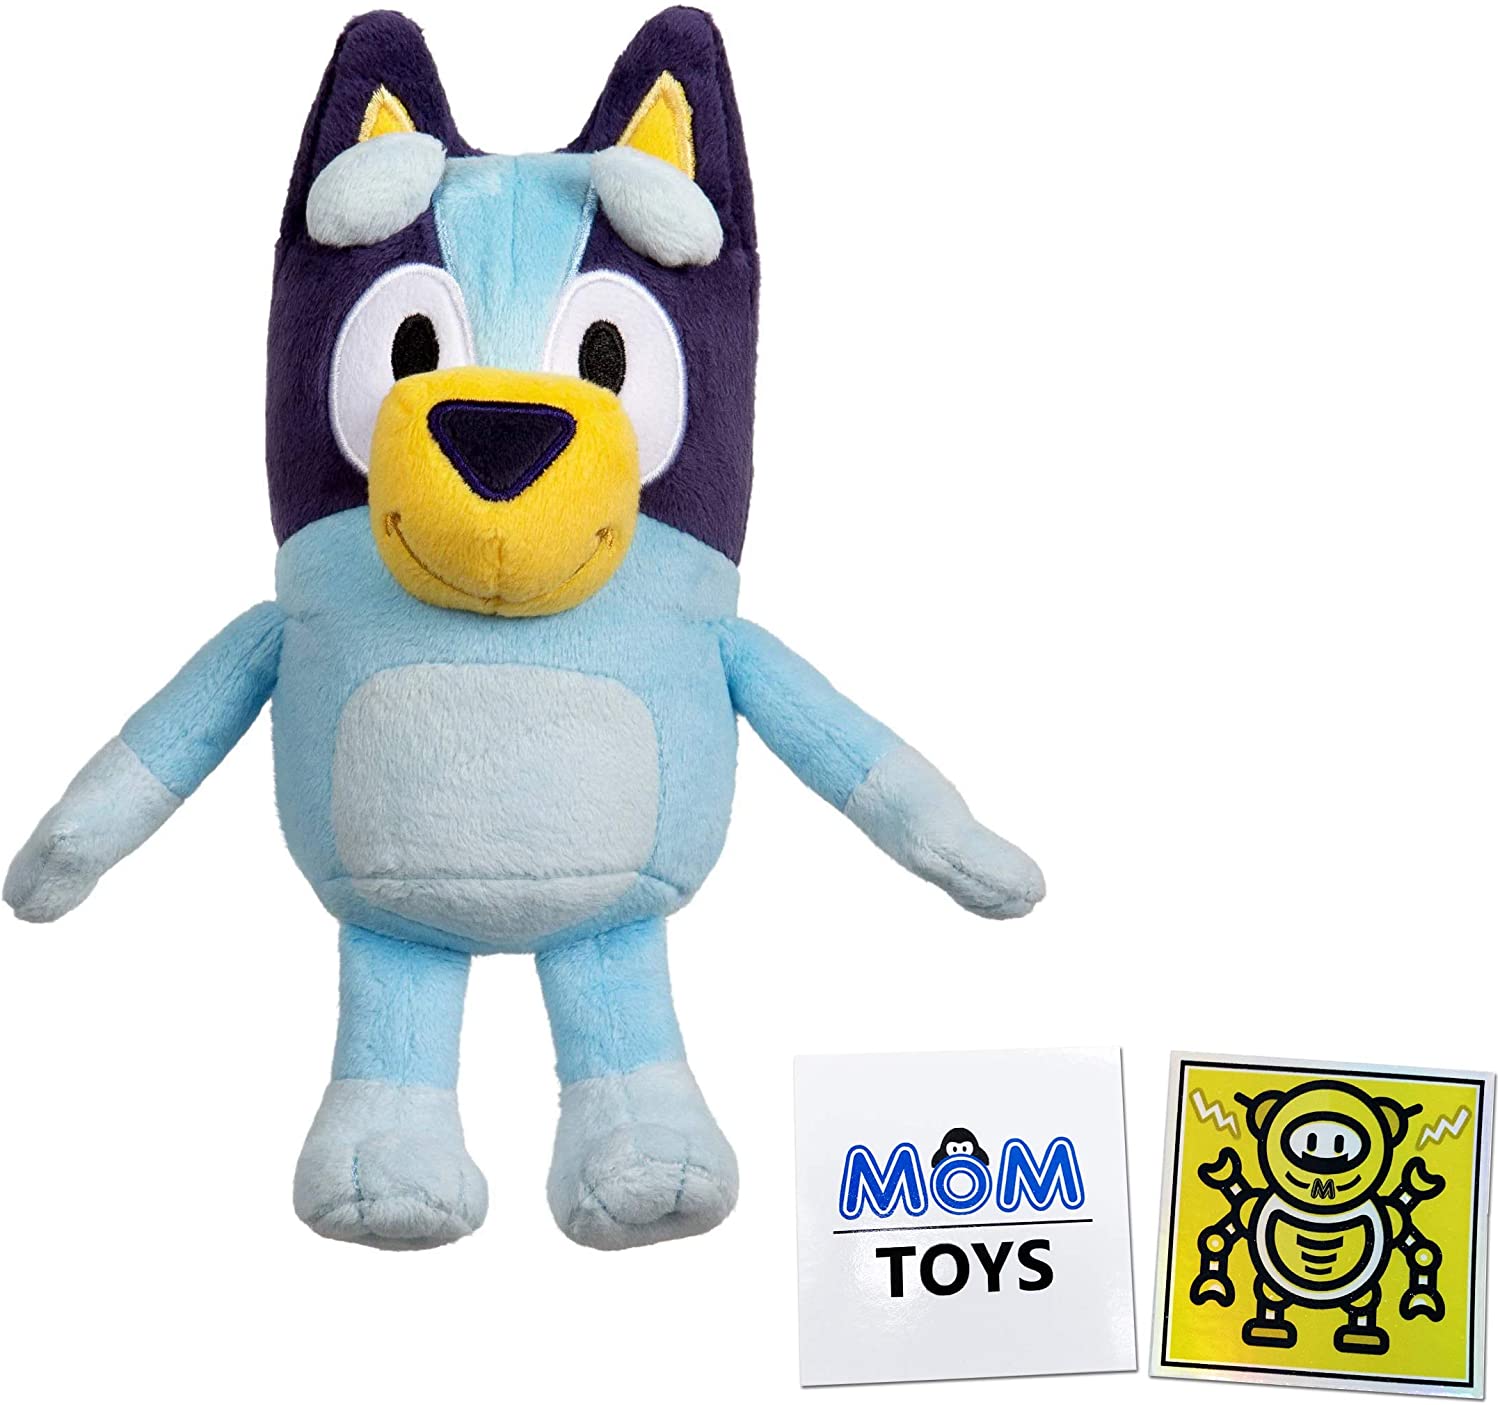 Bluey Friends Plush 8 Inch Bluey Plush with 2 My Outlet Mall Stickers